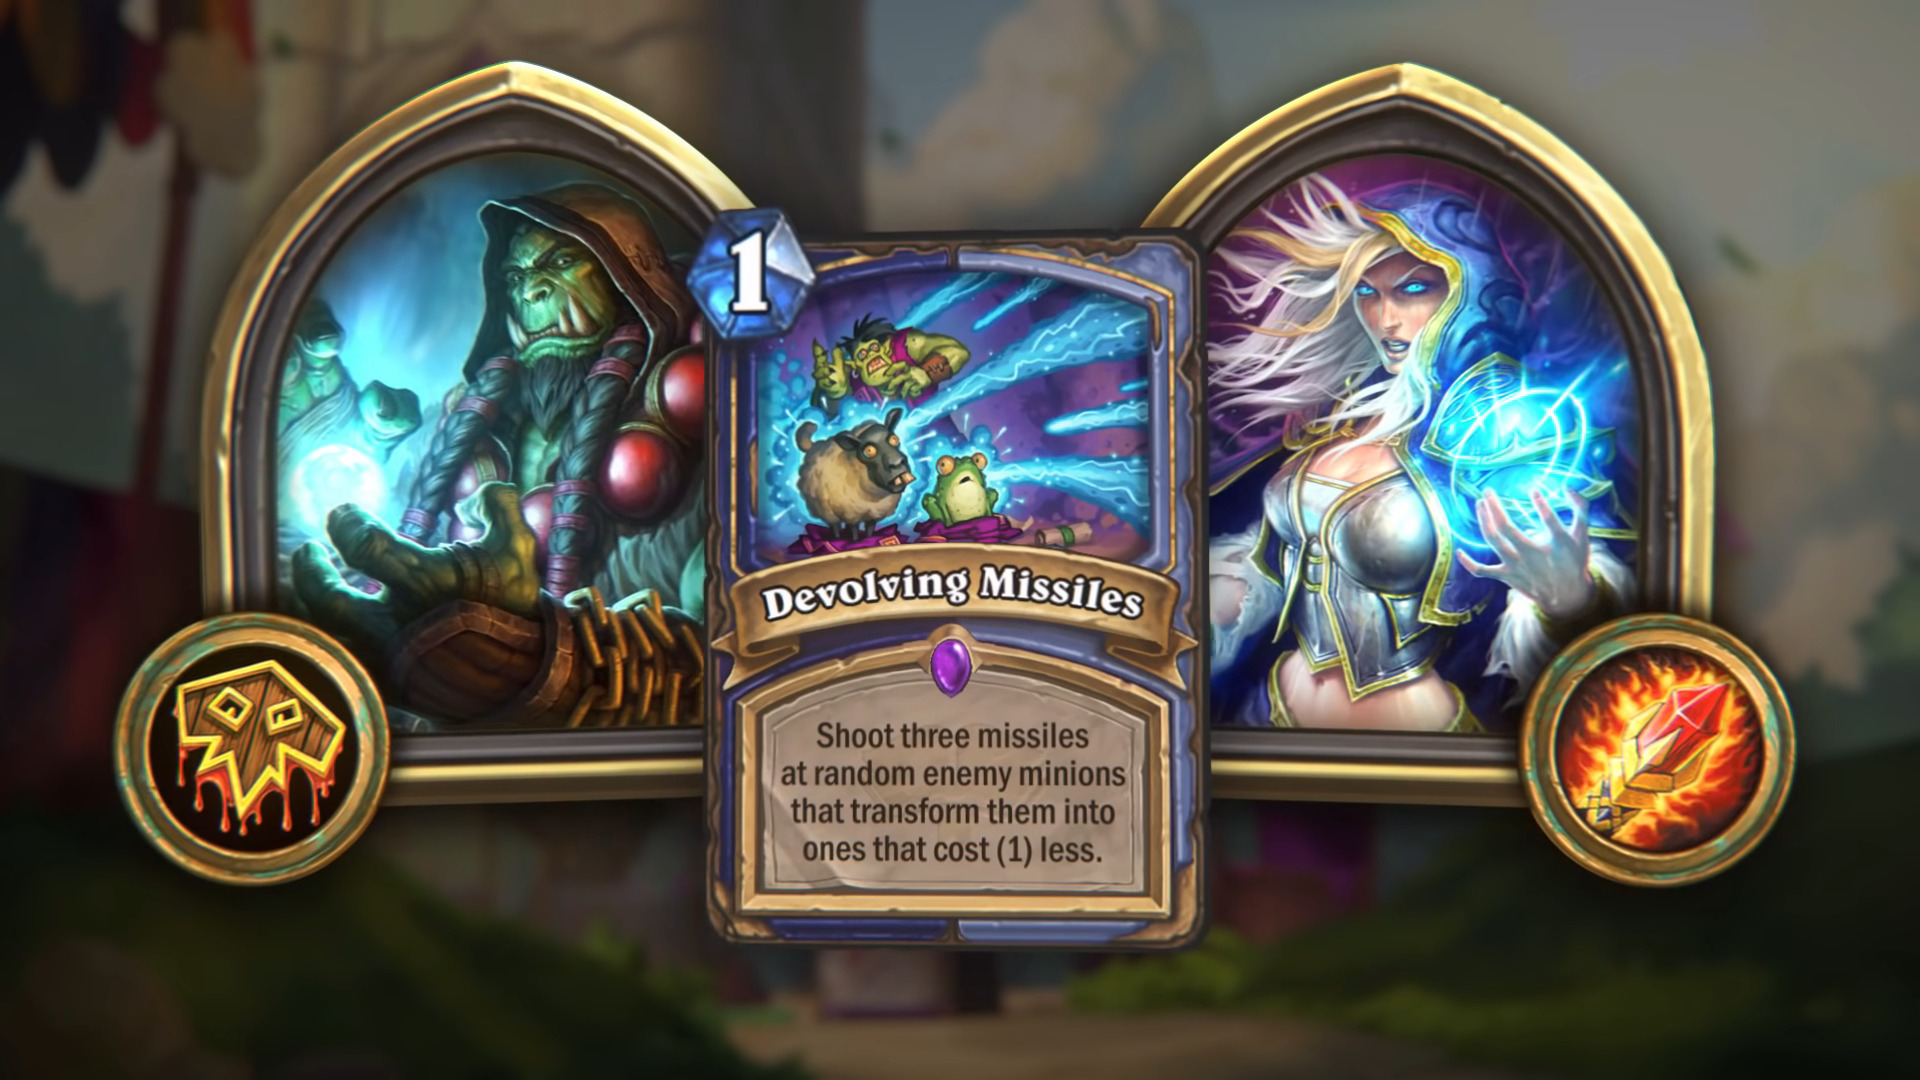 Blizzard Hotfixes Crucial Hearthstone’s Discover Mechanic After Priest Dominated The Meta